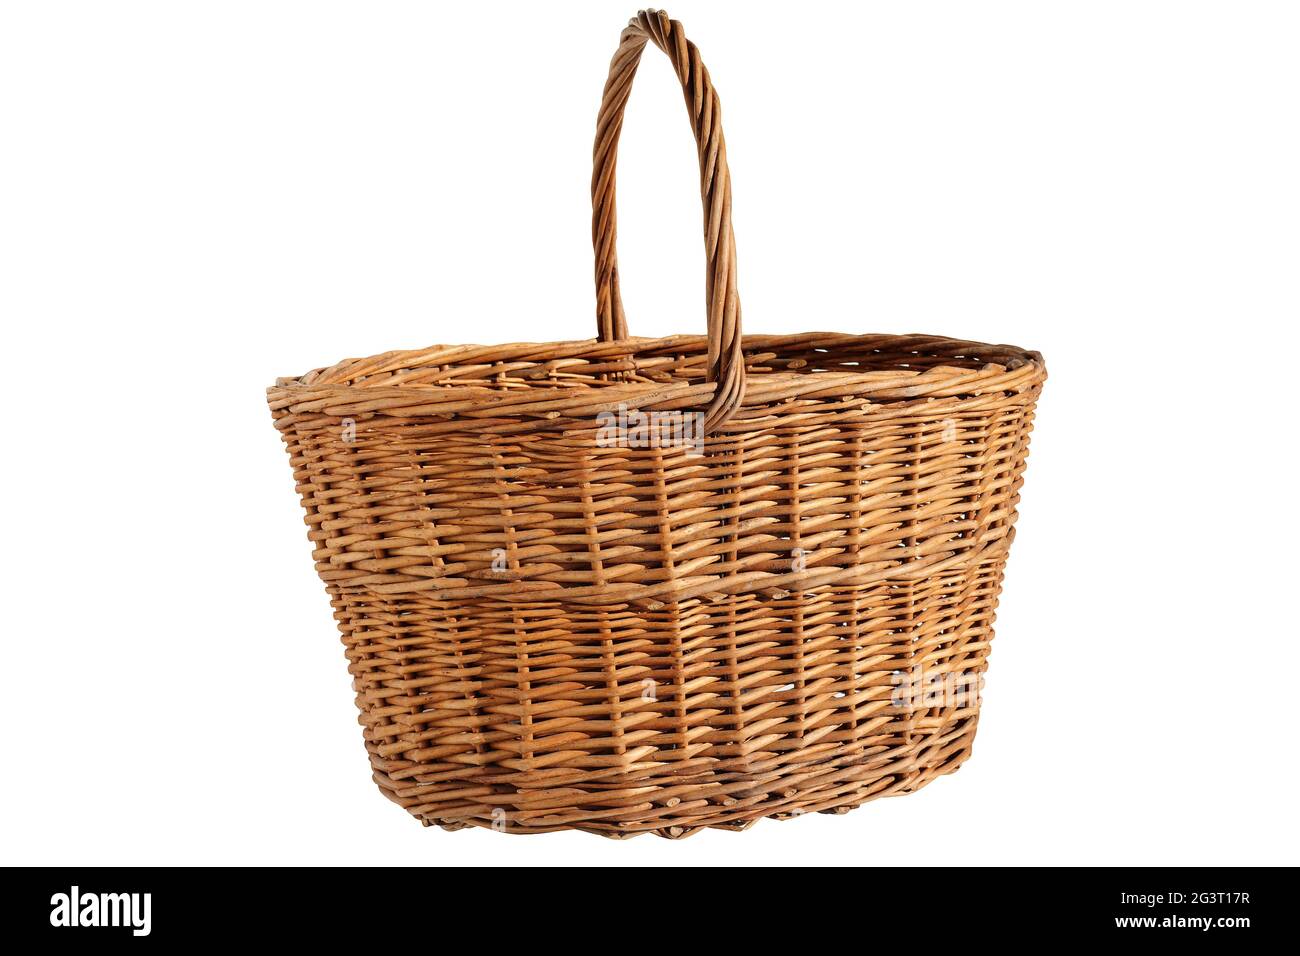 Wicker wooden basket with a round handle. Front view. Isolated on a white background Stock Photo